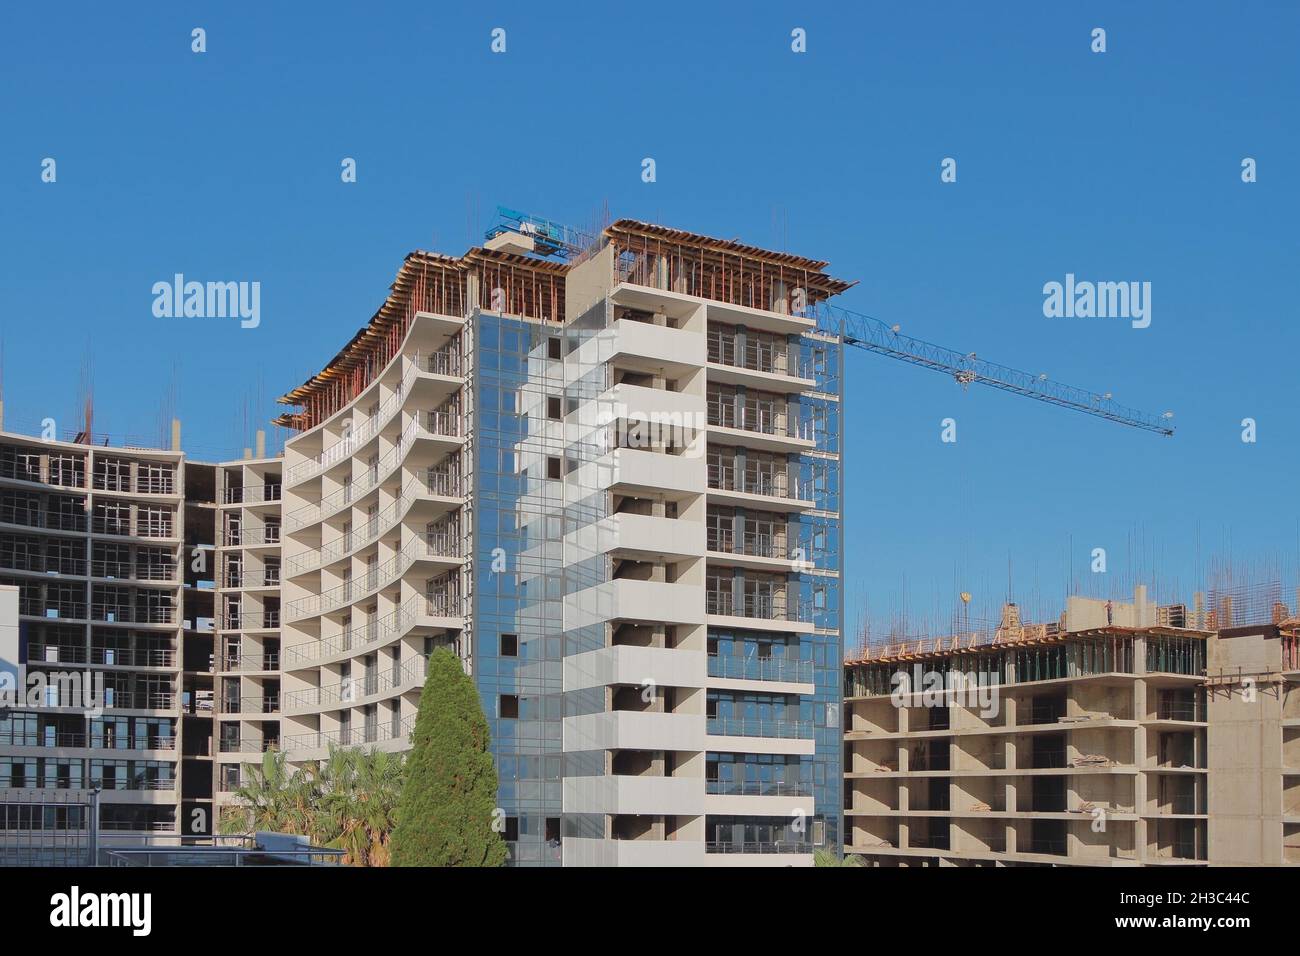 Construction of multistorey residential complex. Adler, Sochi, Russia Stock Photo